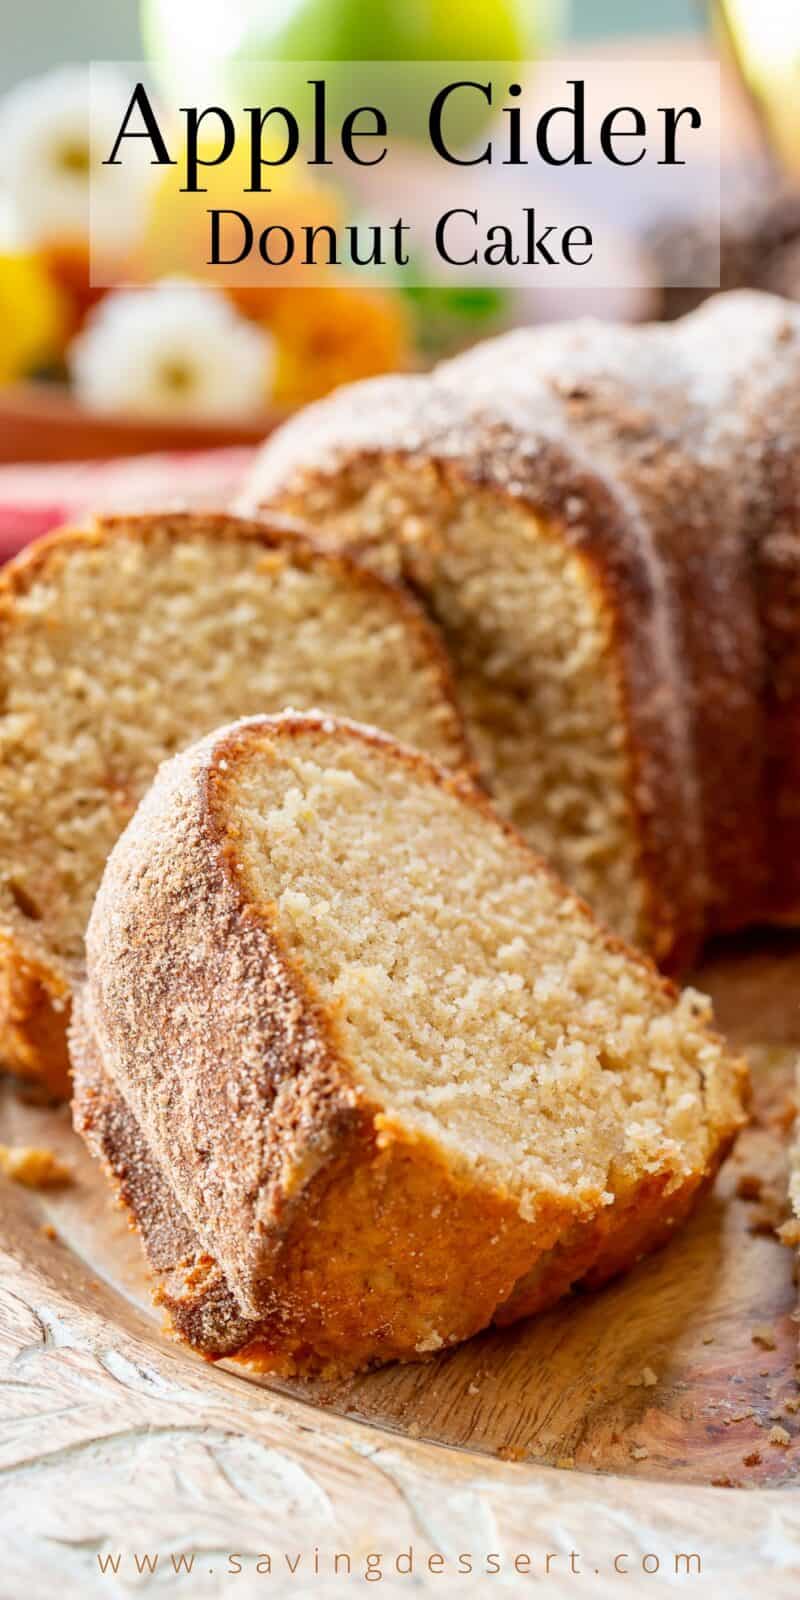 Sliced Bundt cake covered with cinnamon and sugar on a platter